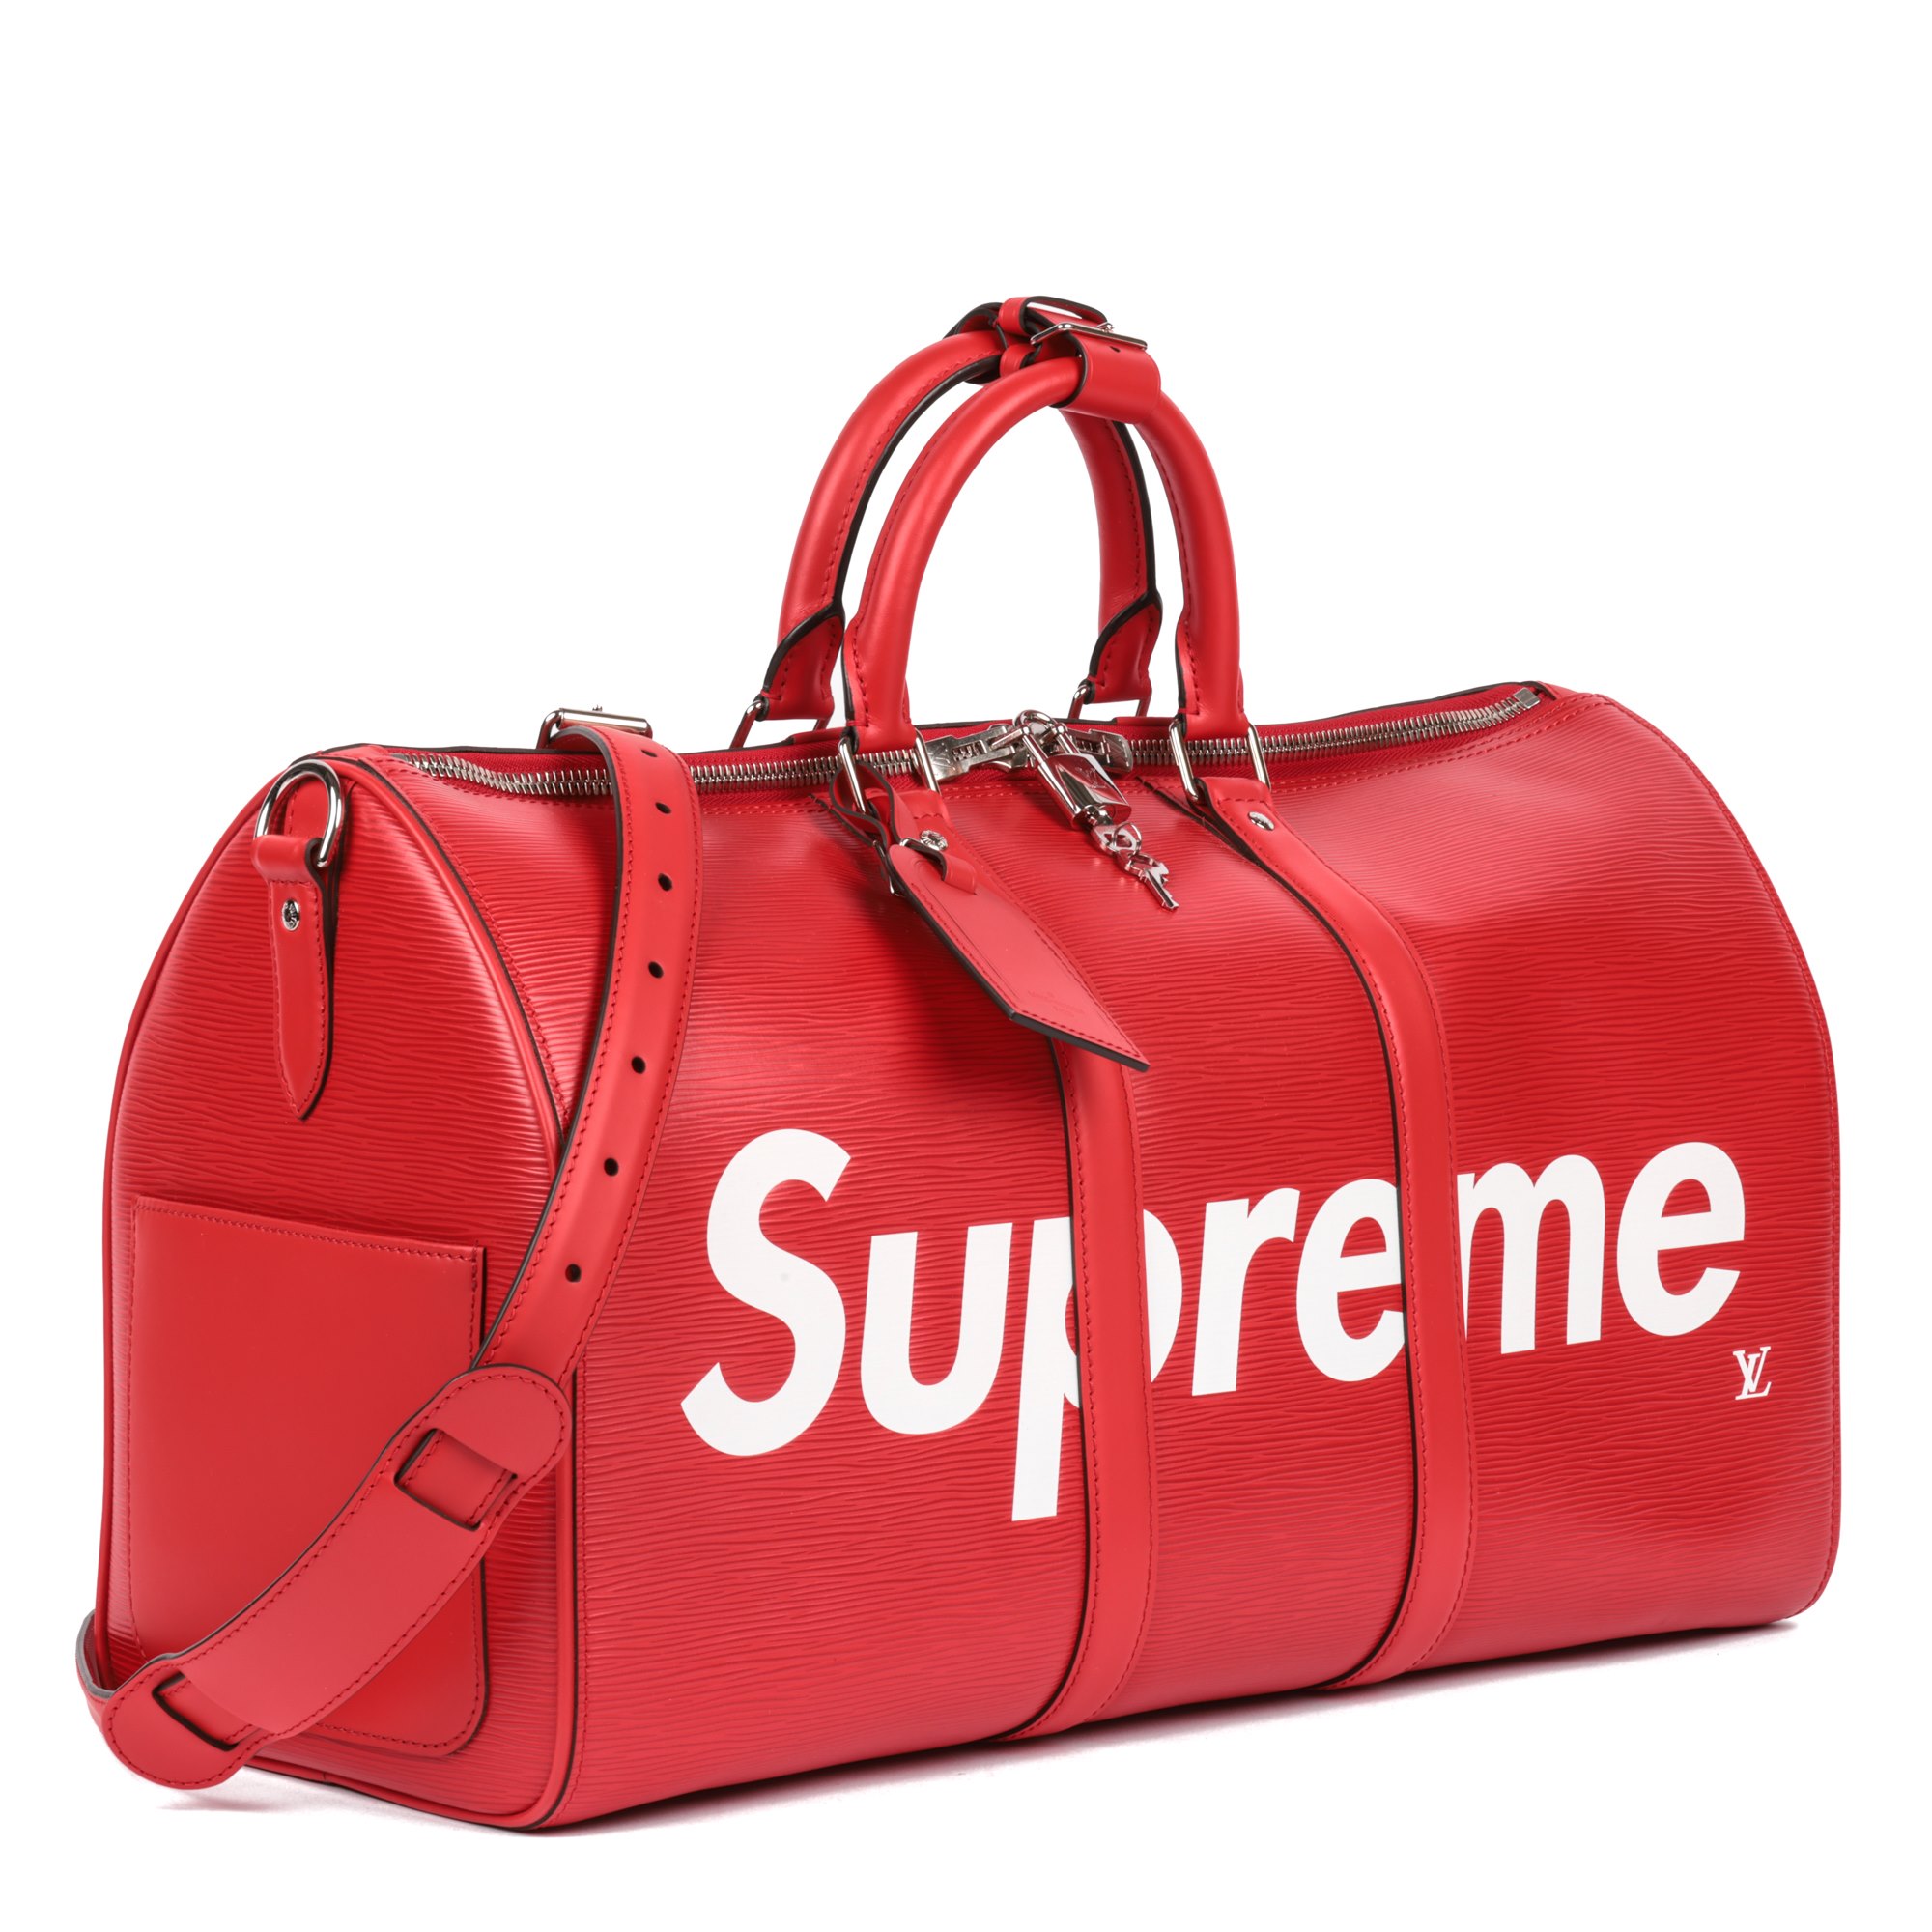 Louis Vuitton X Supreme Red Epi Leather Keepall 45cm Bandouliere